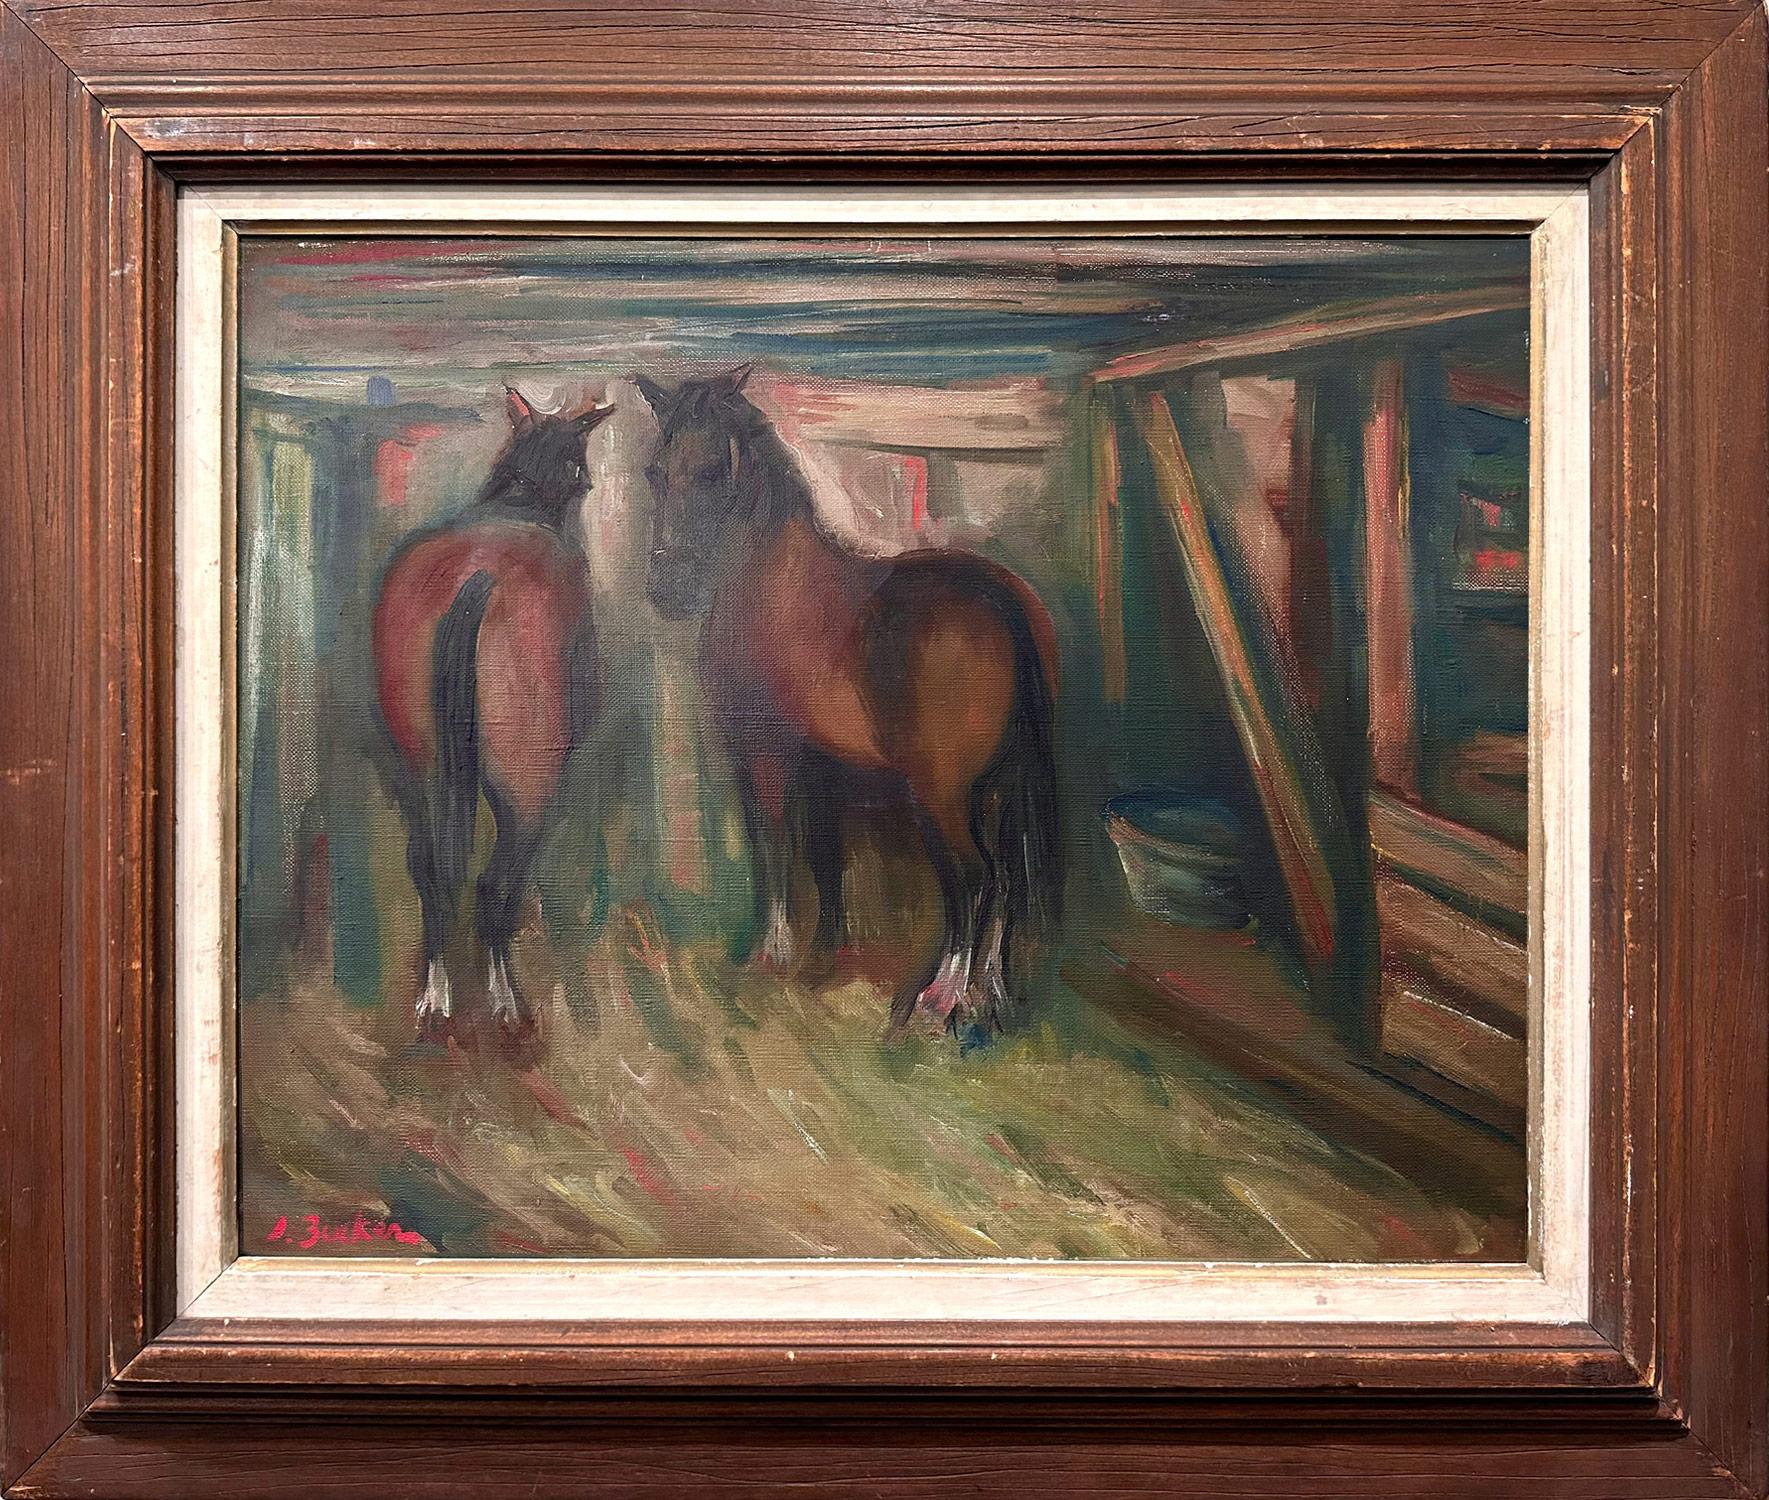 "Horses in Stable" Post-Impressionist Pastoral Interior Oil Painting on Canvas